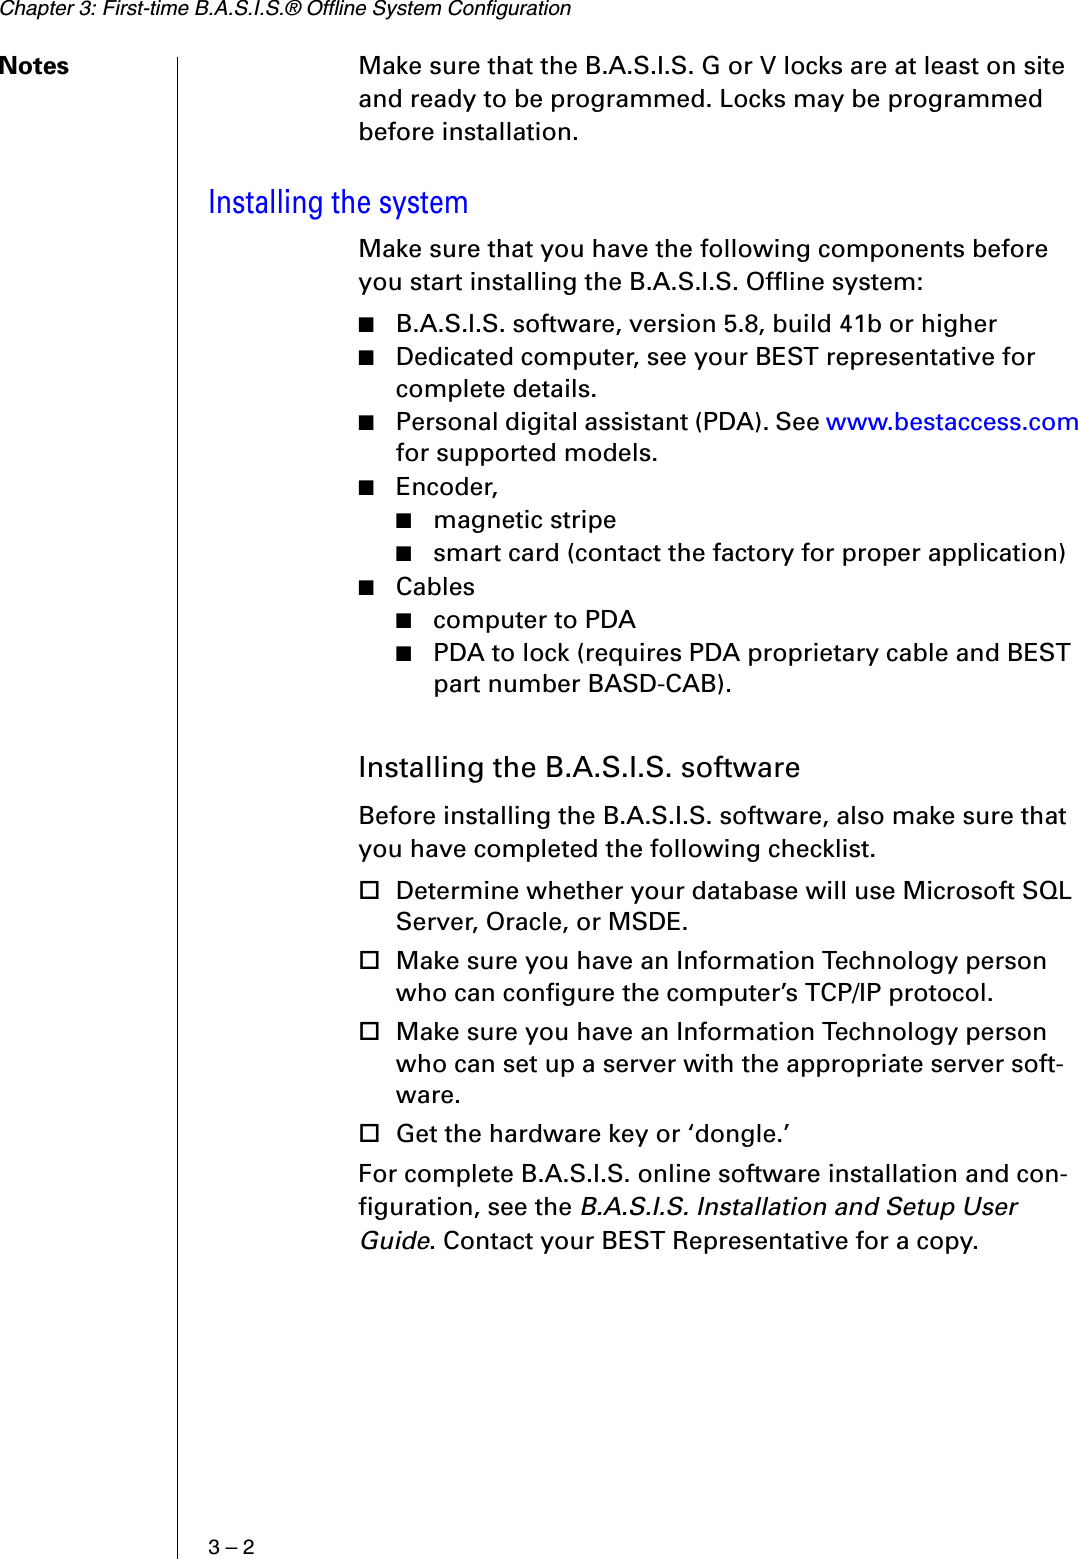 Chapter 3: First-time B.A.S.I.S.® Offline System Configuration3 – 2Notes Make sure that the B.A.S.I.S. G or V locks are at least on site and ready to be programmed. Locks may be programmed before installation.Installing the systemMake sure that you have the following components before you start installing the B.A.S.I.S. Offline system:■B.A.S.I.S. software, version 5.8, build 41b or higher■Dedicated computer, see your BEST representative for complete details.■Personal digital assistant (PDA). See www.bestaccess.com for supported models.■Encoder, ■magnetic stripe■smart card (contact the factory for proper application)■Cables■computer to PDA■PDA to lock (requires PDA proprietary cable and BEST part number BASD-CAB).Installing the B.A.S.I.S. softwareBefore installing the B.A.S.I.S. software, also make sure that you have completed the following checklist. Determine whether your database will use Microsoft SQL Server, Oracle, or MSDE.Make sure you have an Information Technology person who can configure the computer’s TCP/IP protocol.Make sure you have an Information Technology person who can set up a server with the appropriate server soft-ware.Get the hardware key or ‘dongle.’For complete B.A.S.I.S. online software installation and con-figuration, see the B.A.S.I.S. Installation and Setup User Guide. Contact your BEST Representative for a copy.